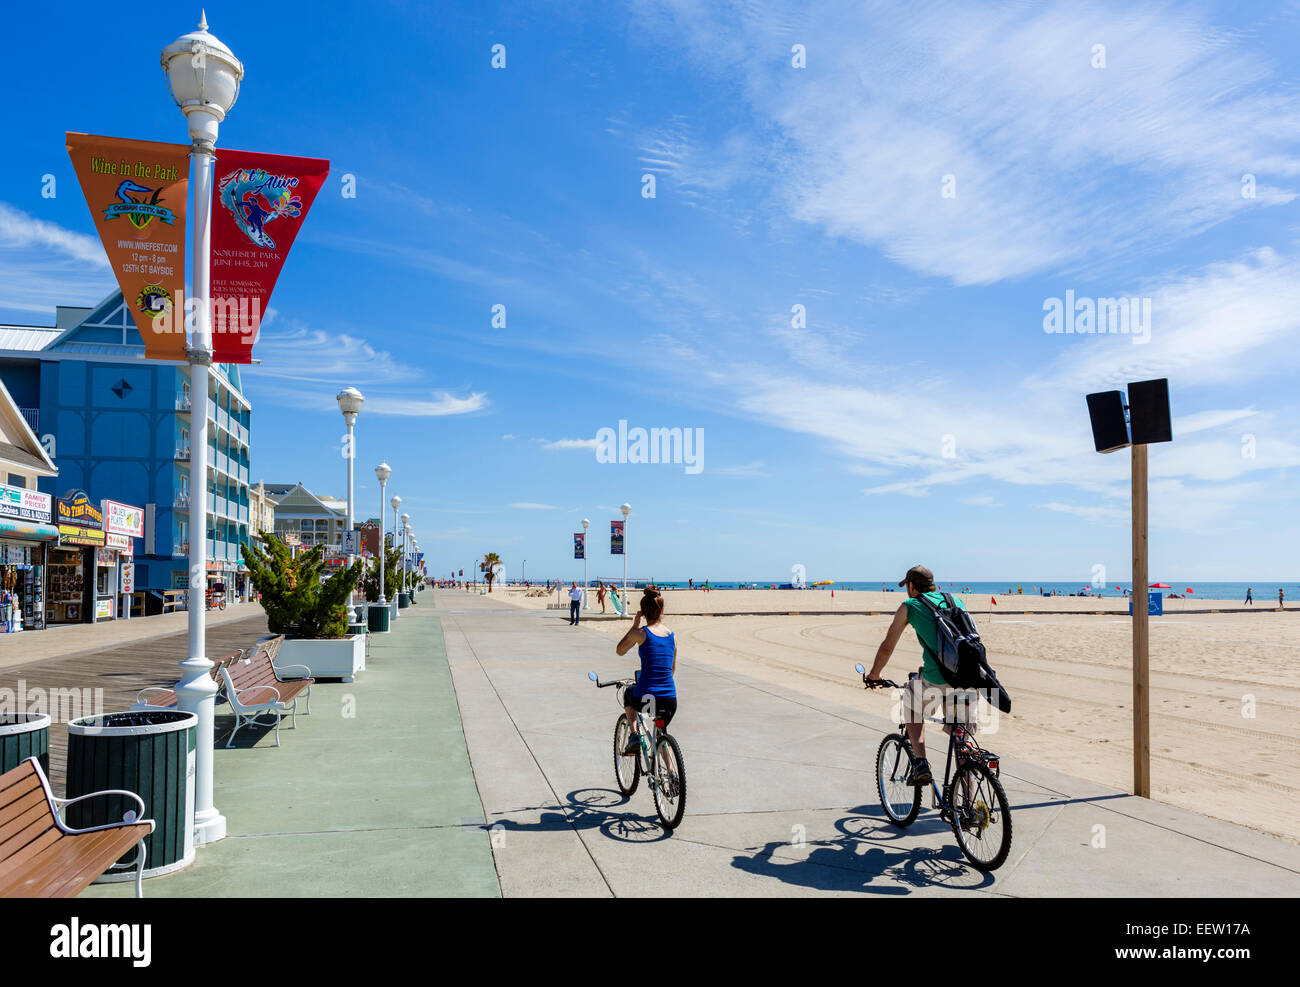 Cyclists on the boardwalk at Ocean City, Maryland, USA Stock Photo